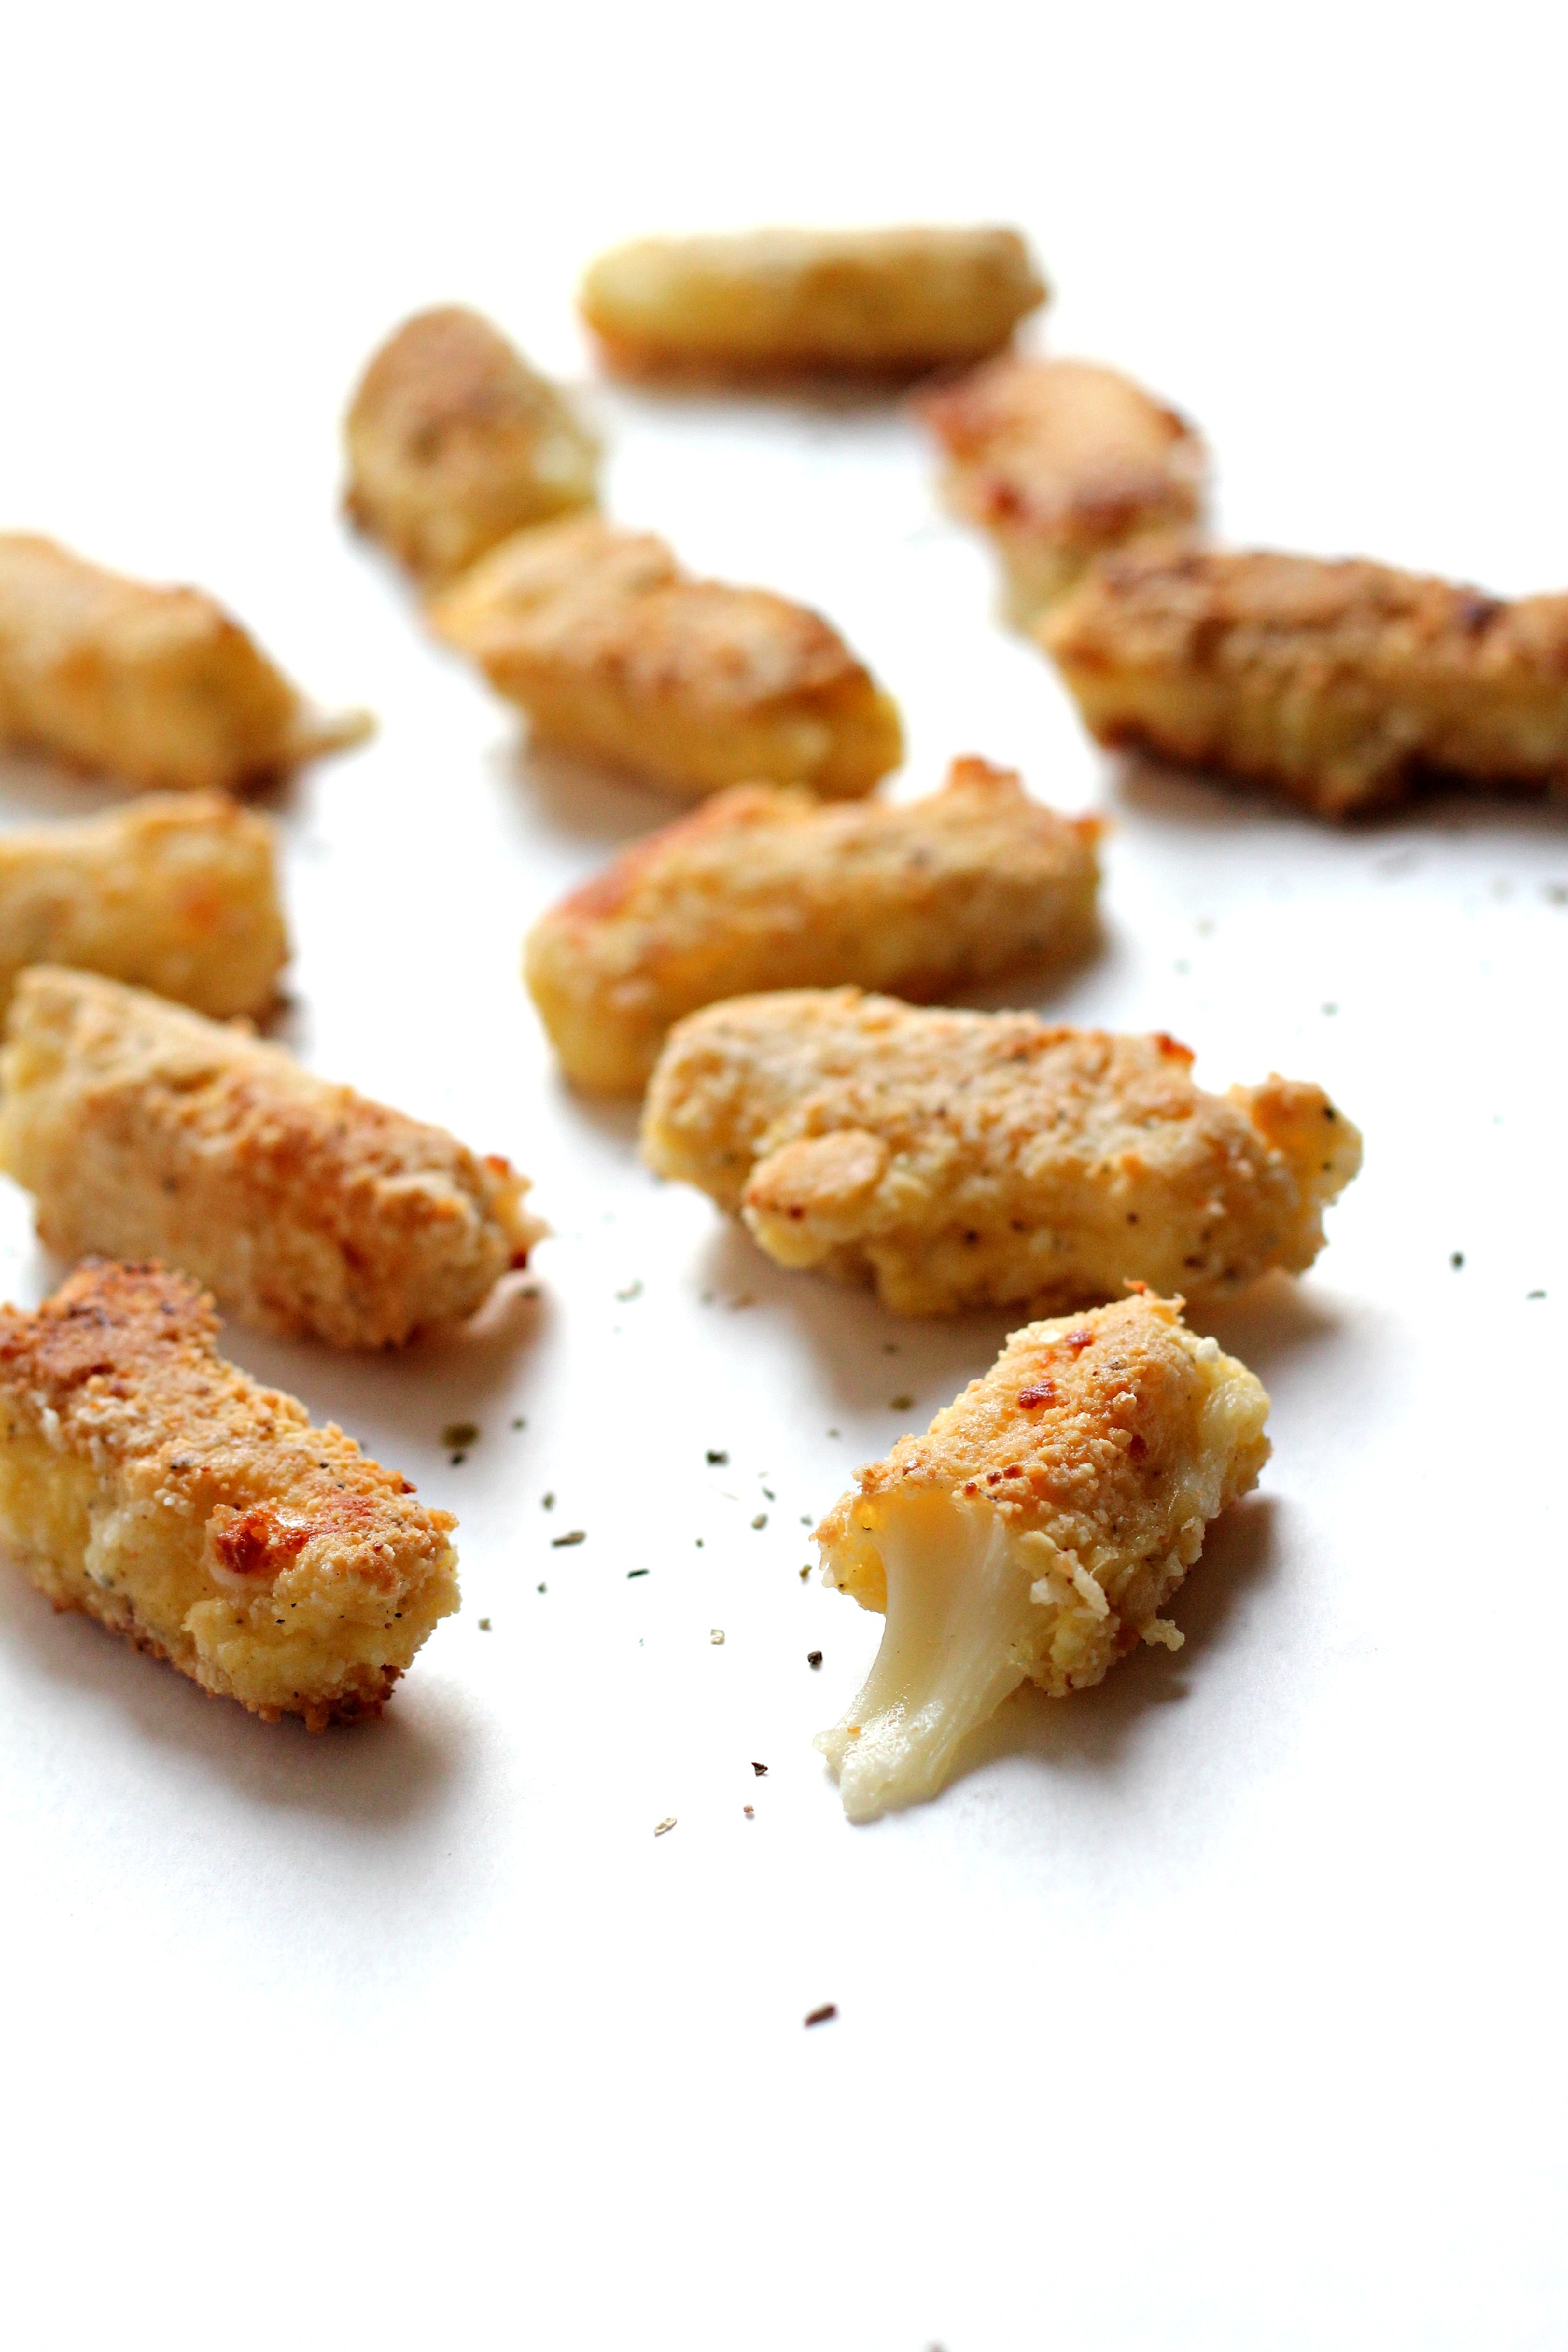 These Grain Free Mozzarella Sticks are my favorite appetizer to bring to a party. No one will even know they're grain free, low carb.